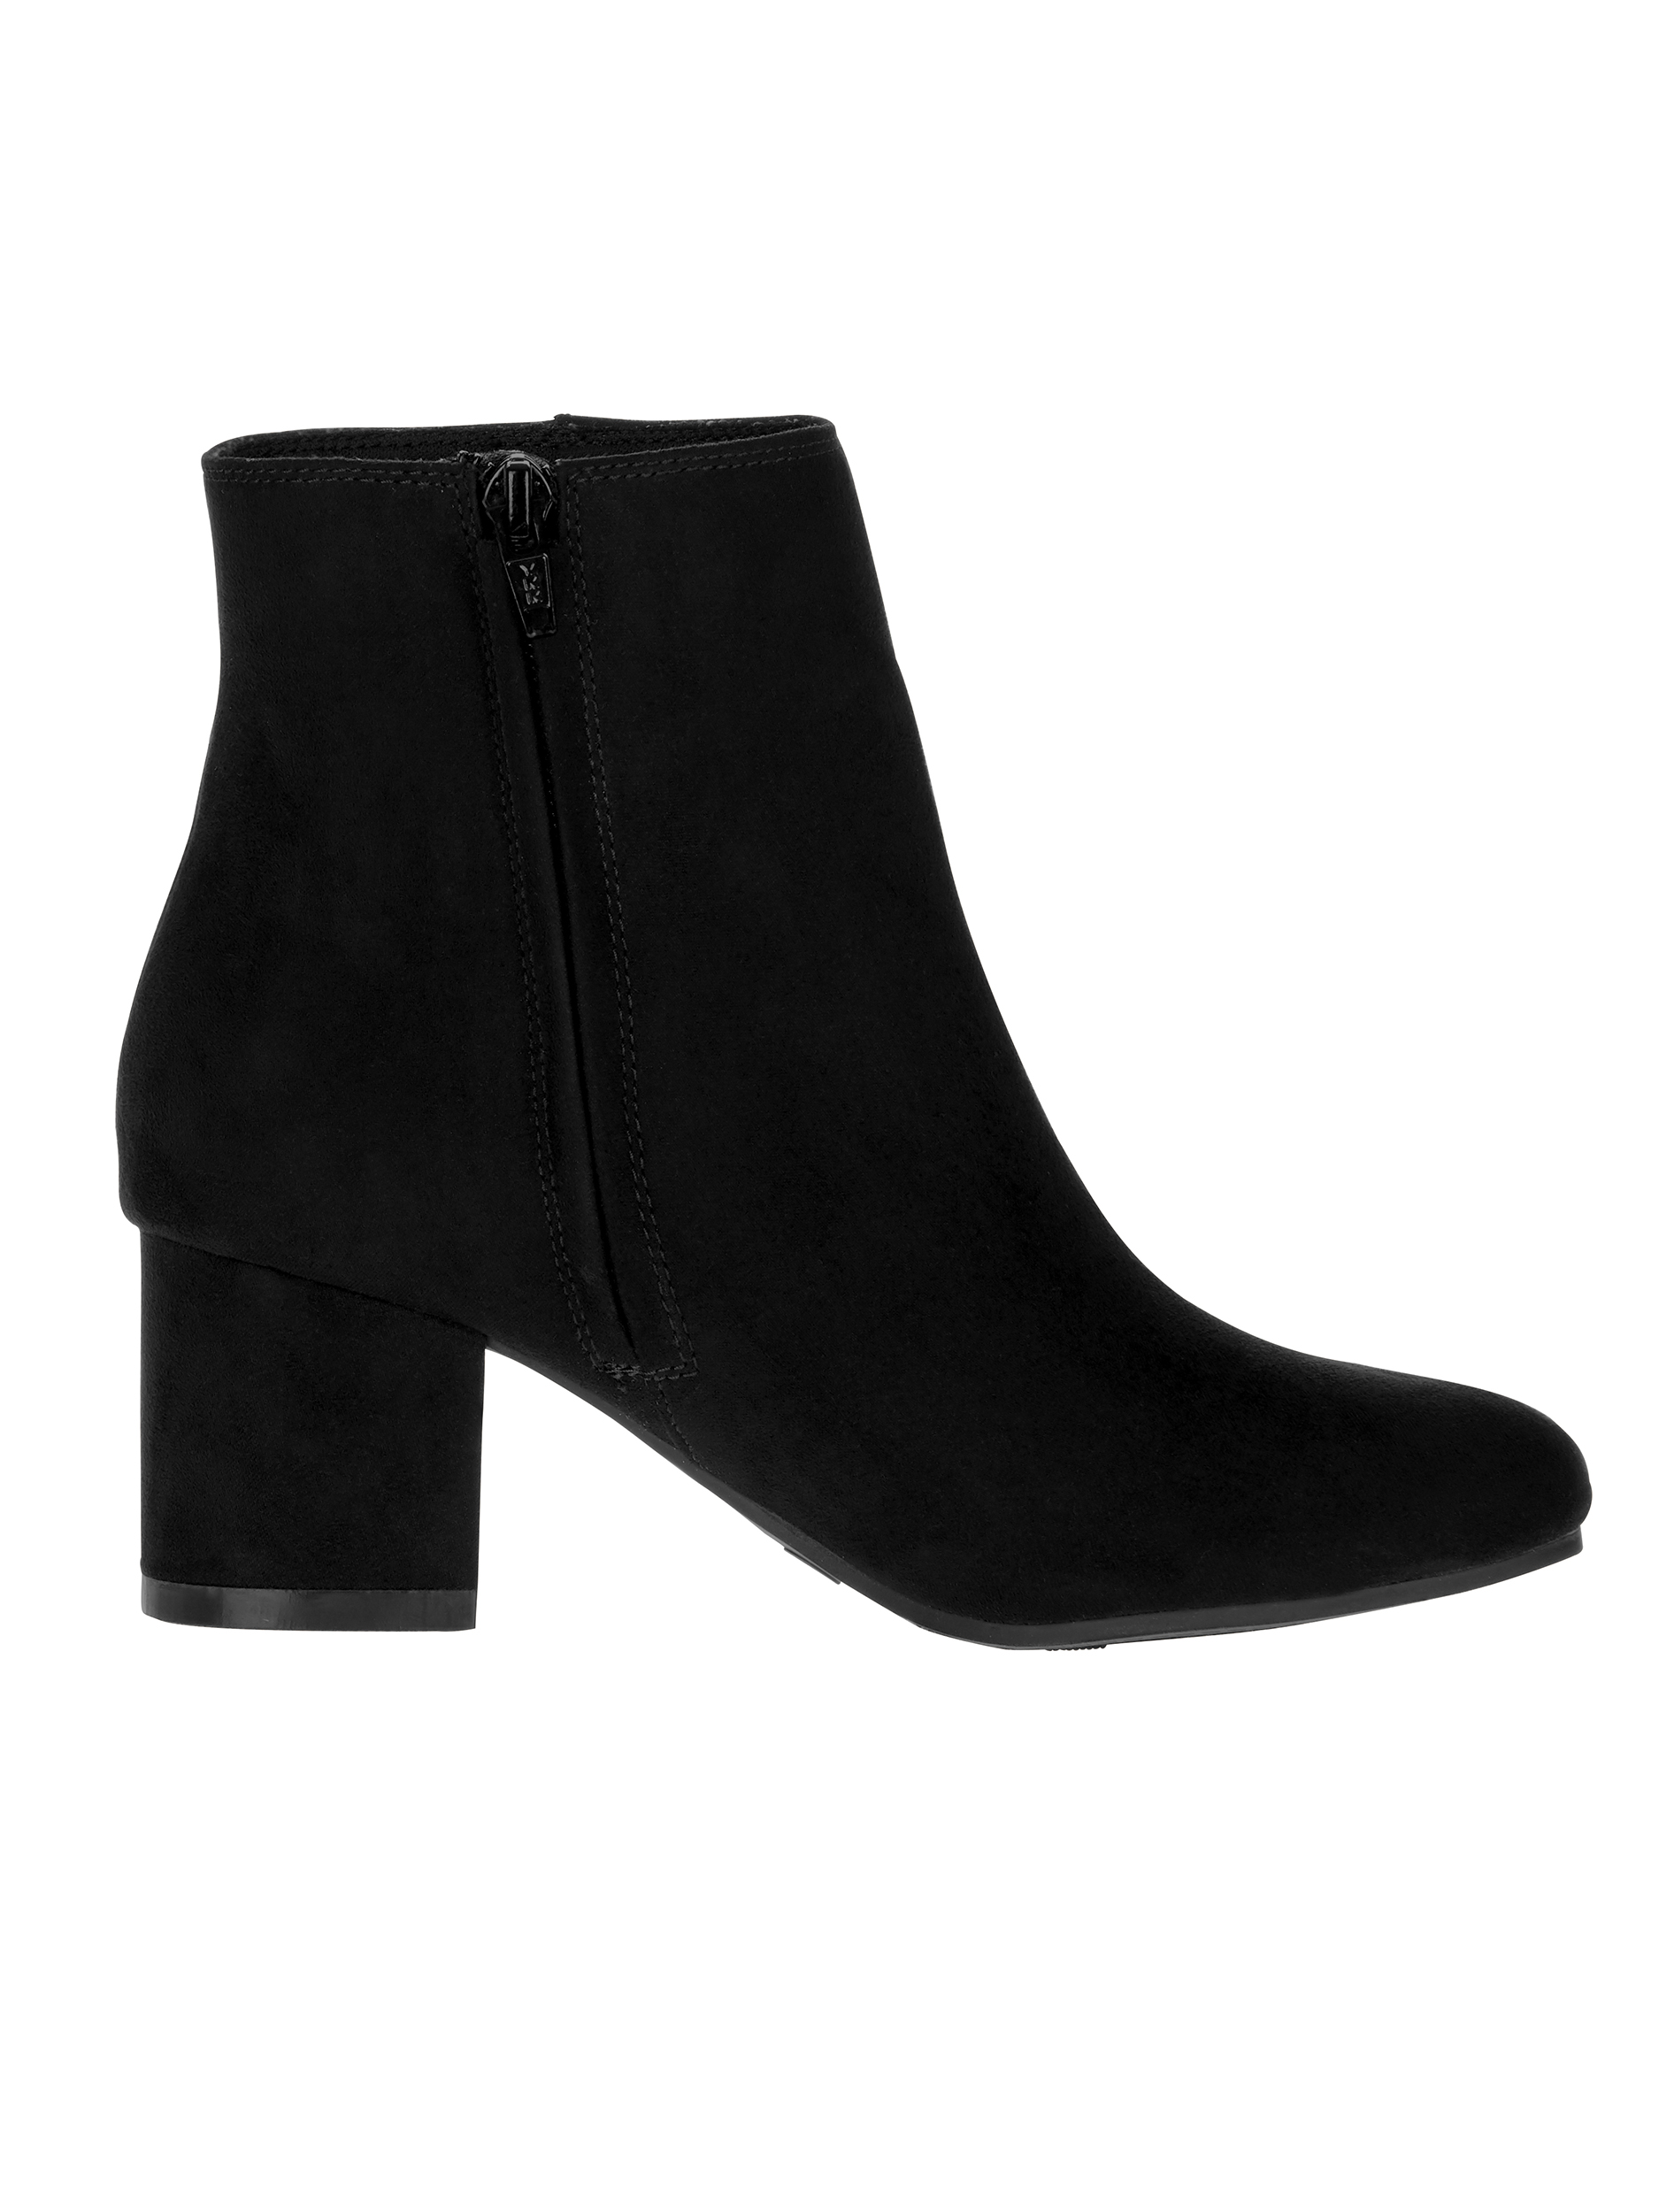 Time and Tru Women's Mid Boot - image 1 of 7